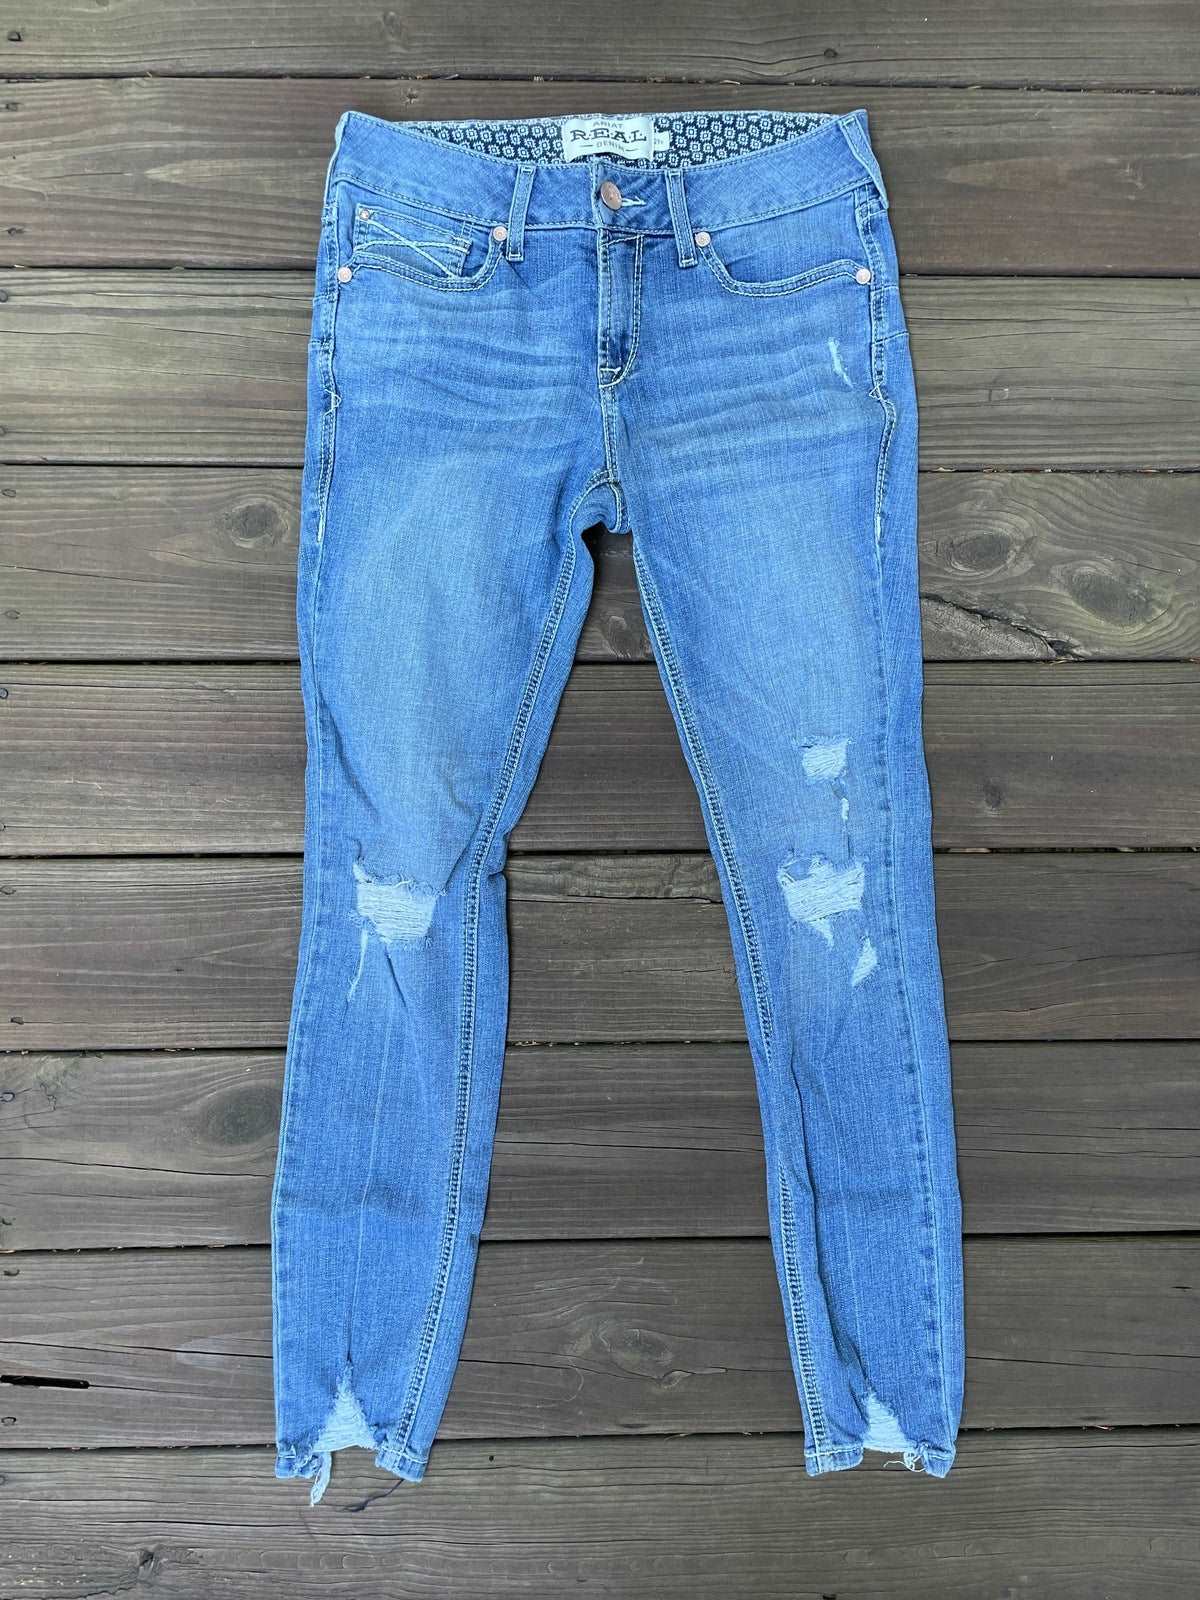 ThriftedEquestrian Clothing 29R Ariat Real Denim Ripped Skinny Jeans - 29R